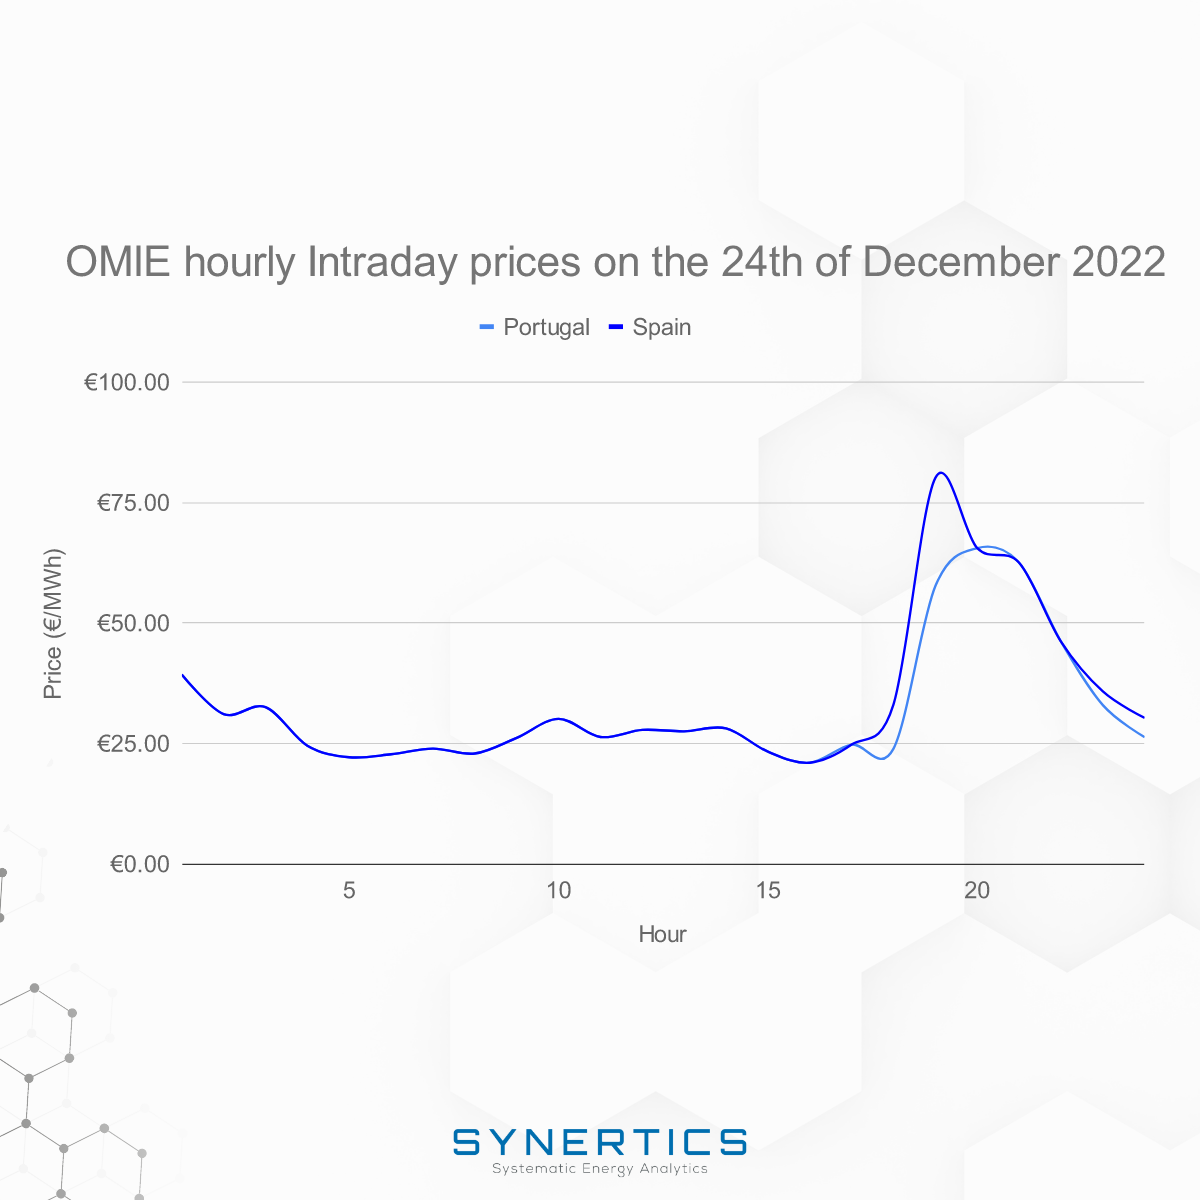 OMIE hourly Intraday prices (Portugal and Spain)